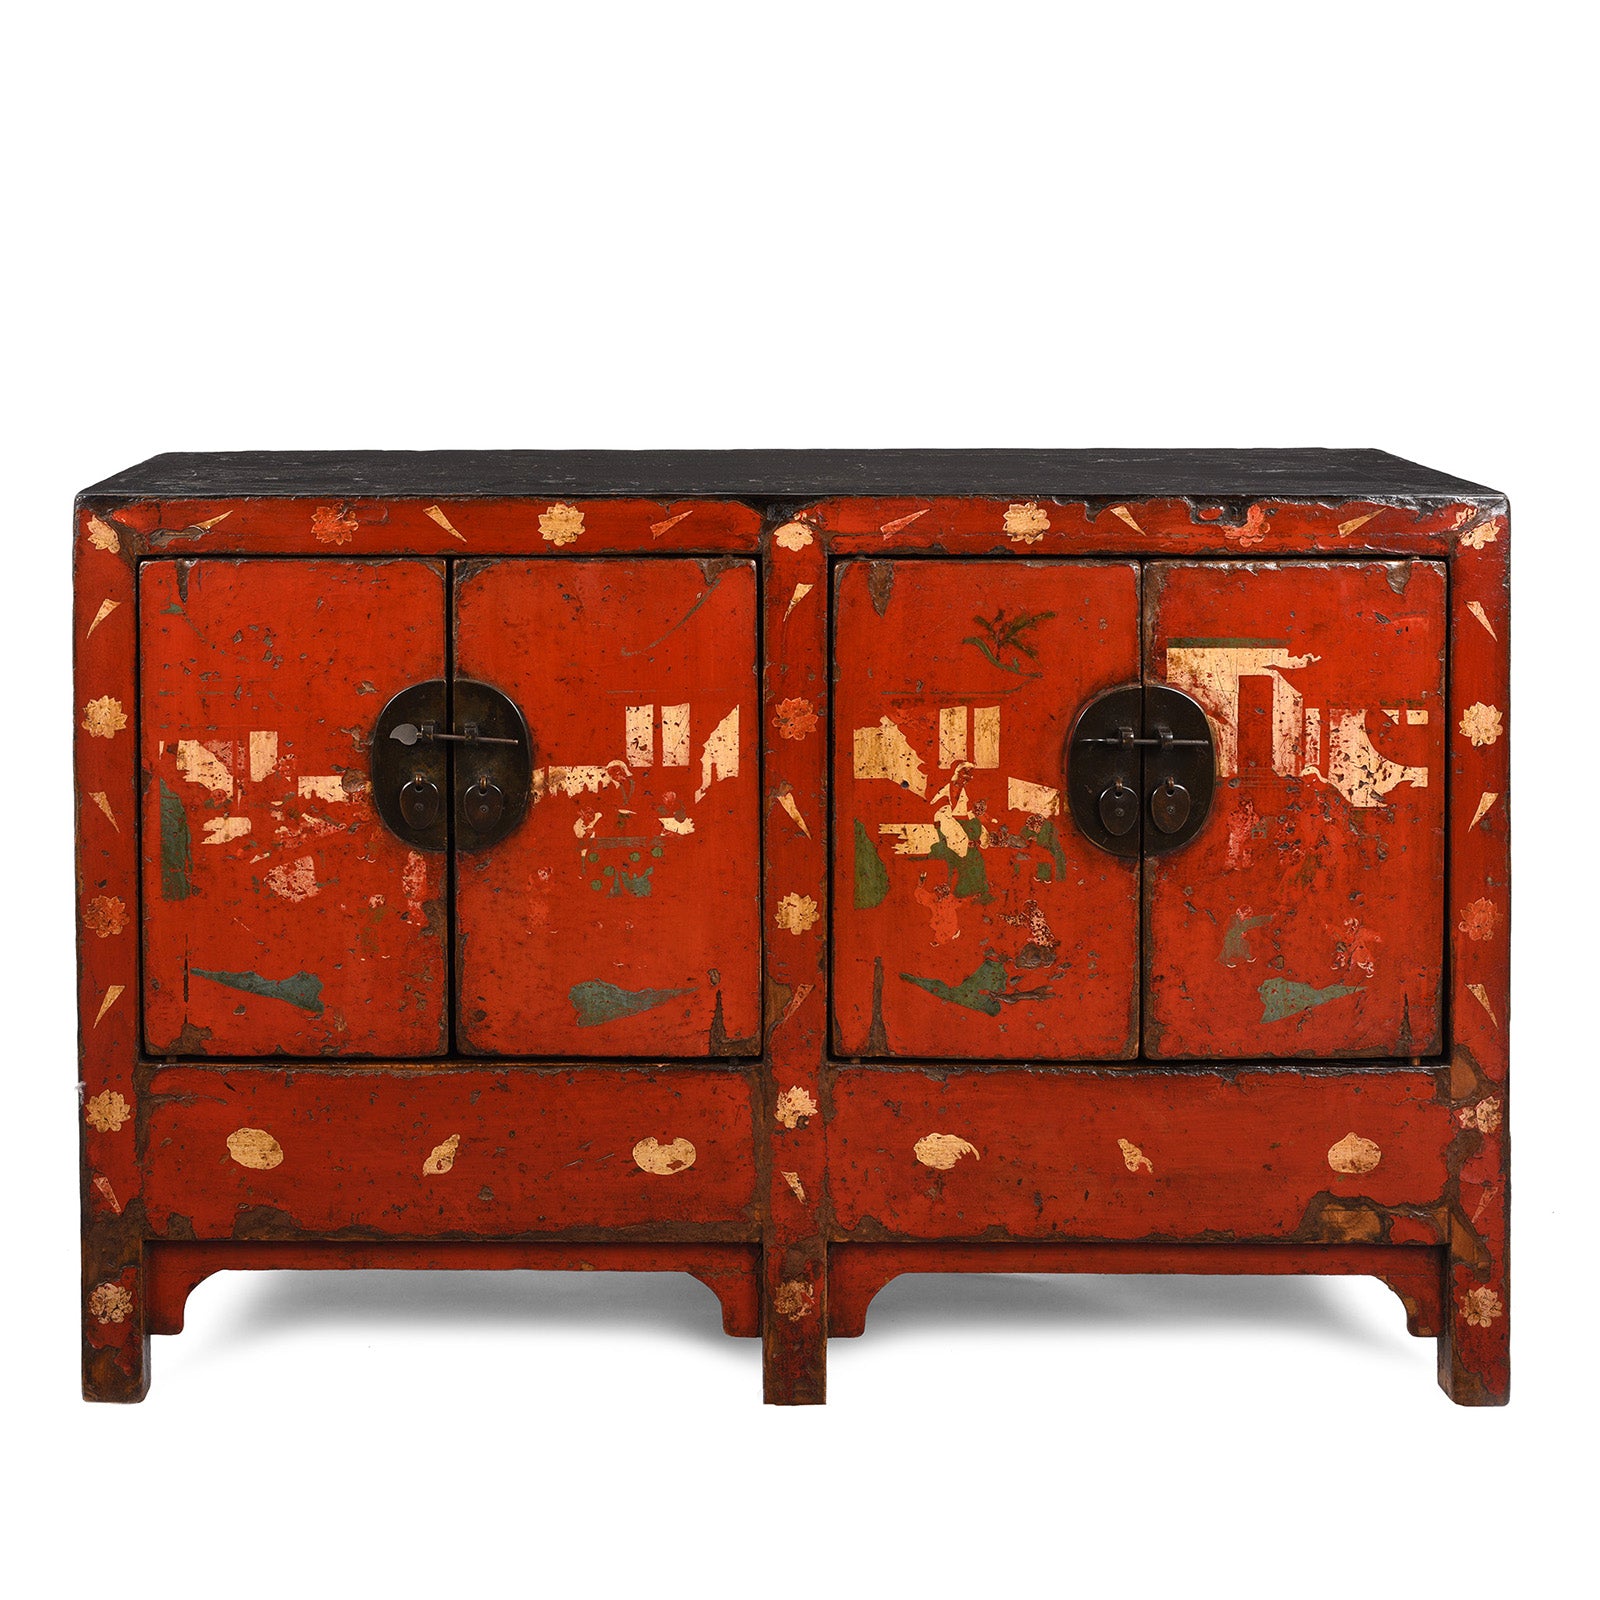 Antique Red Lacquer Sideboard From Shanxi | Indigo Antiques